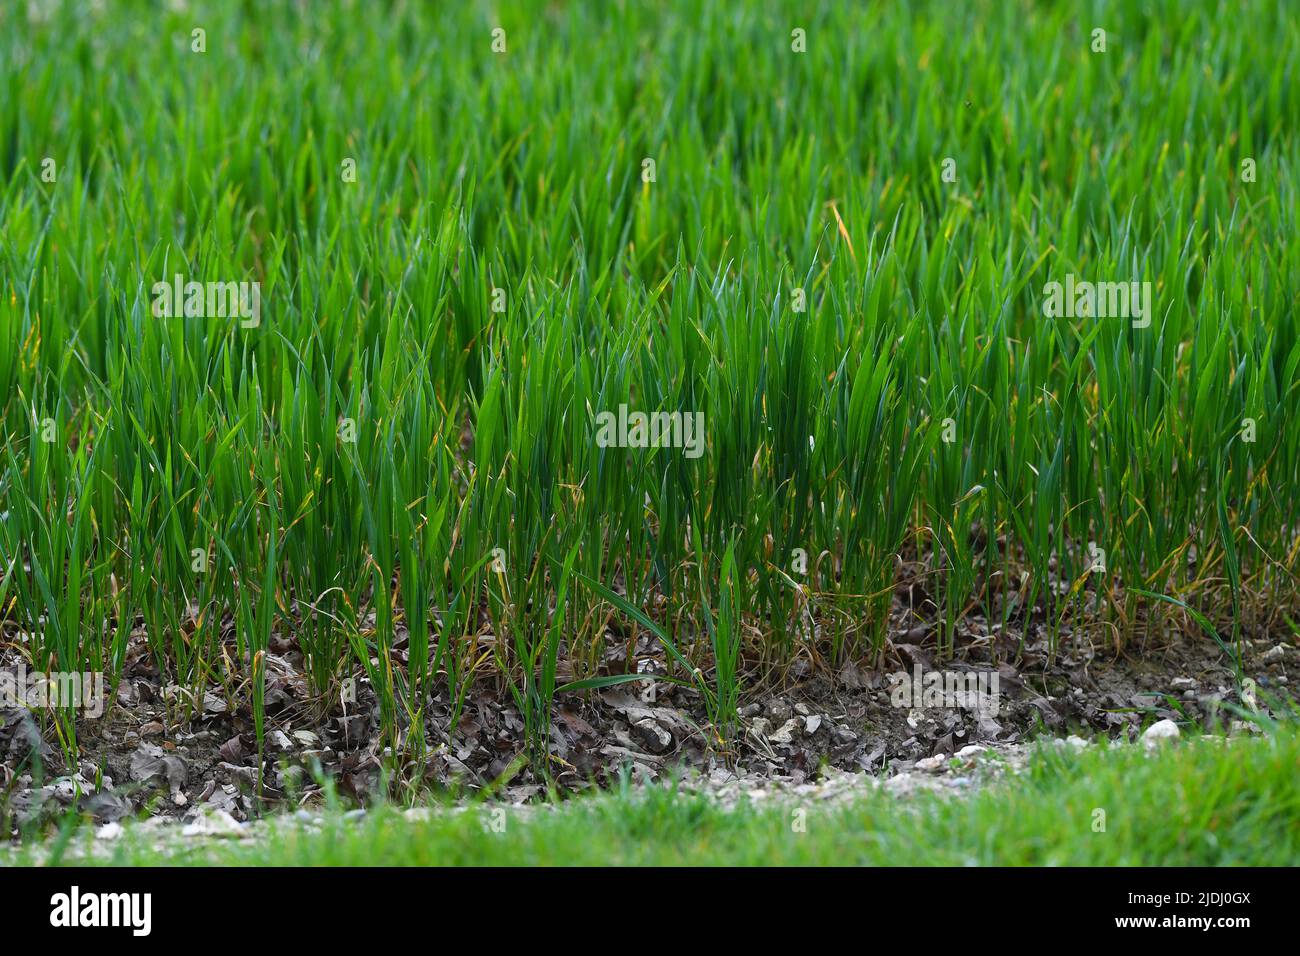 Close-up of Newley planted food crops sprouting from the ground growing in a farmers field with copy space Stock Photo